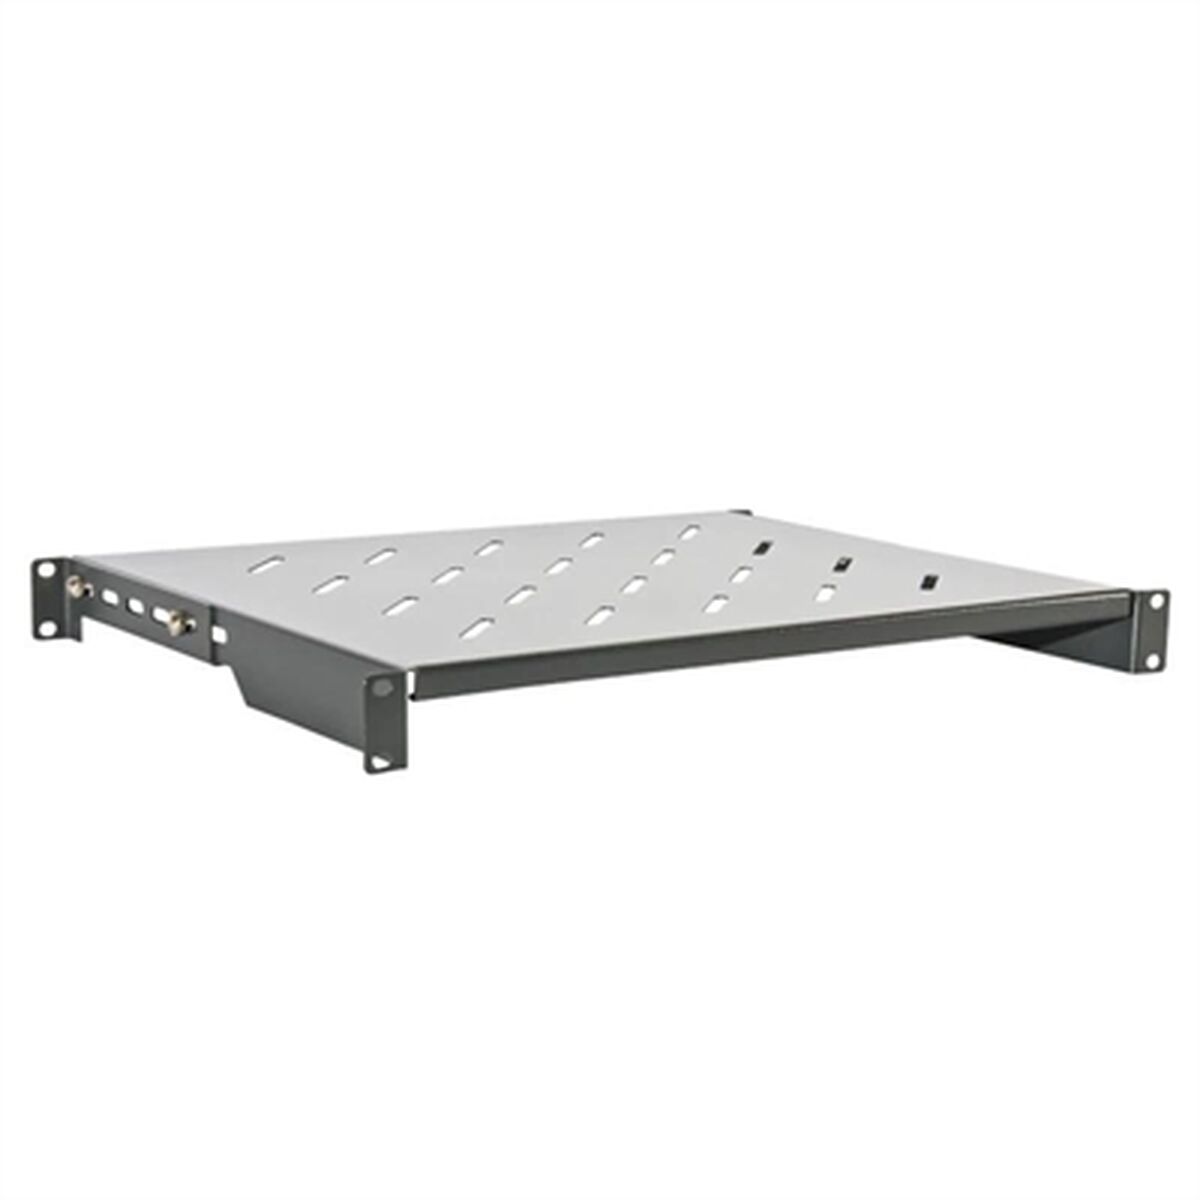 Fixed Tray for Wall Rack Cabinet 2LAN ARABL1U80, 2LAN, Computing, Accessories, fixed-tray-for-wall-rack-cabinet-2lan-arabl1u80, Brand_2LAN, category-reference-2609, category-reference-2803, category-reference-2828, category-reference-t-19685, category-reference-t-19908, category-reference-t-21349, Condition_NEW, furniture, networks/wiring, organisation, Price_20 - 50, Teleworking, RiotNook